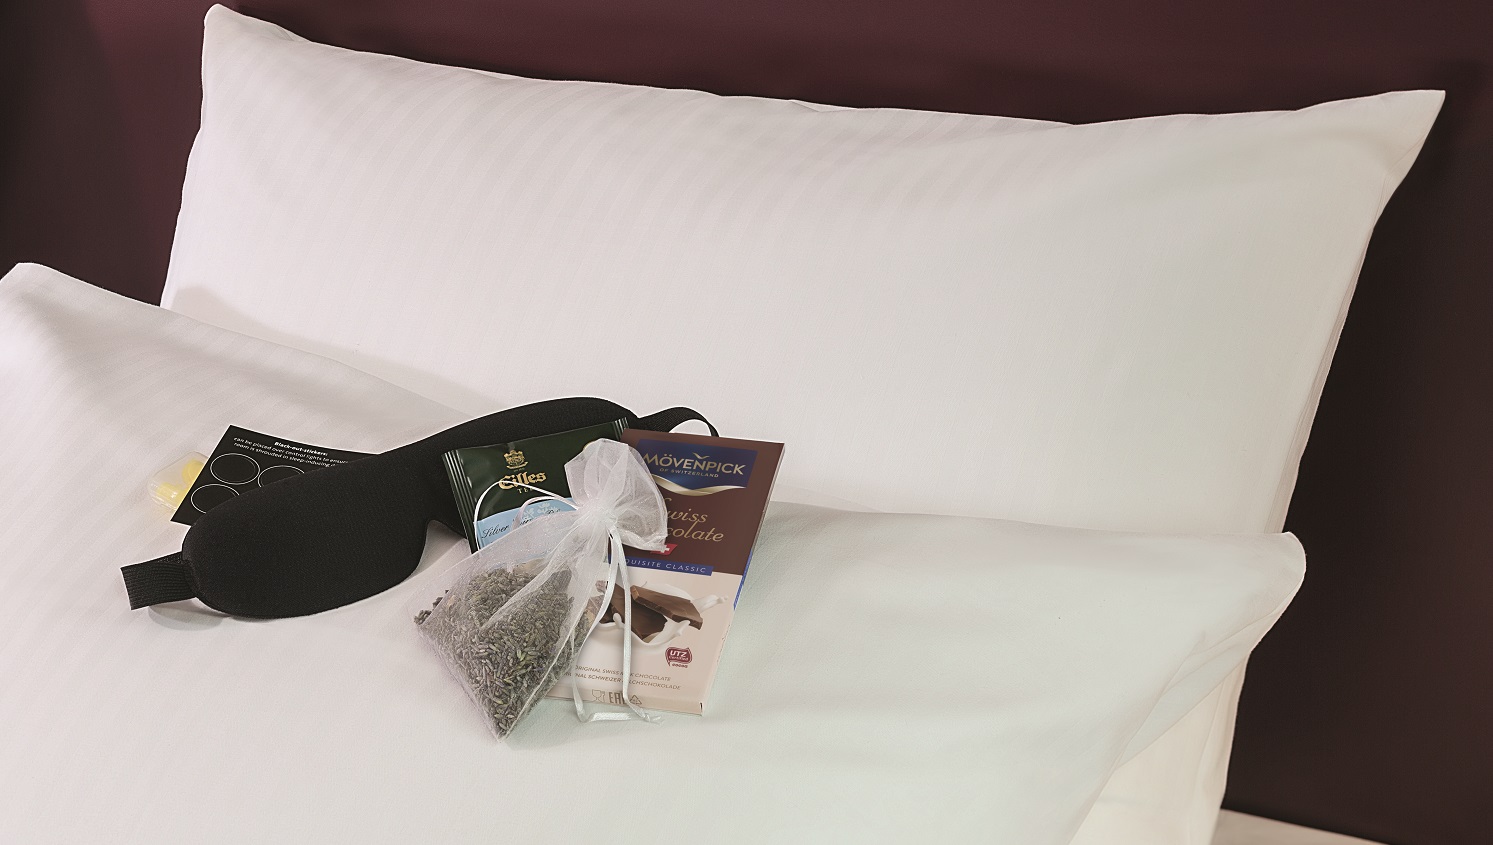 Mvenpick Hotels & Resorts is launching a new room category concept that it says guarantees guests a good nights sleep.